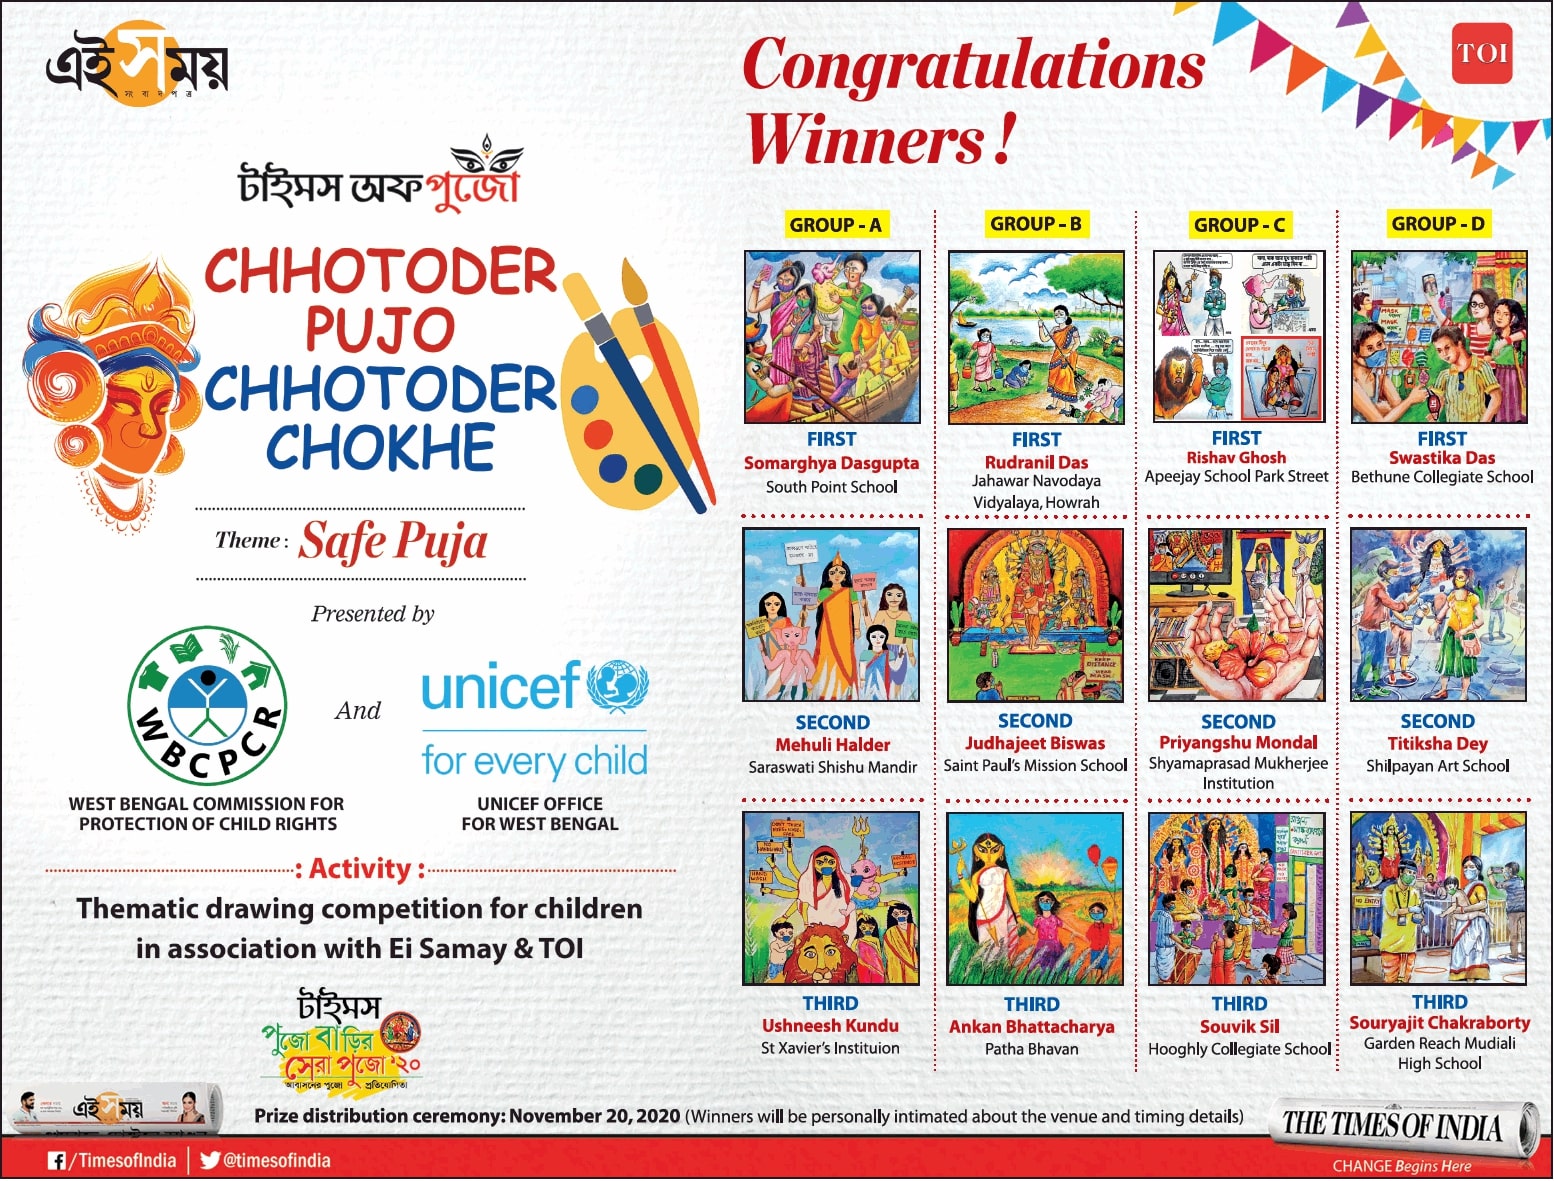 chhotoder-pujo-chhotoder-chokhe-thematic-drawing-competition-for-children-congratulations-winners-ad-toi-kolkota-5-11-2020